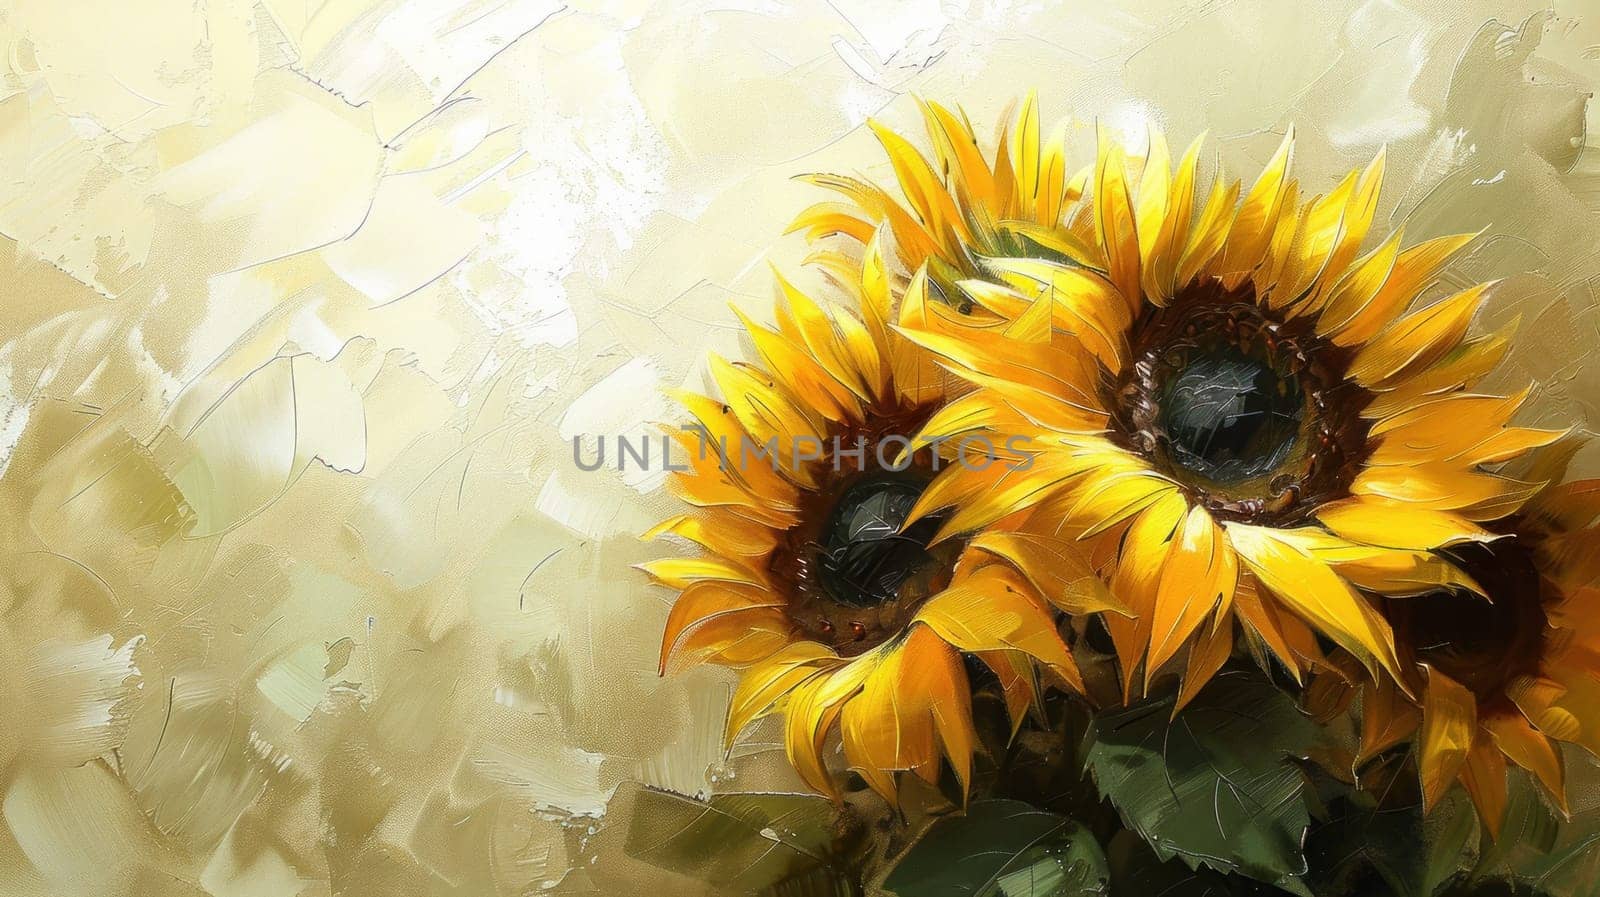 Abstract sunflowers oil painting for home decor, artistic floral design, vibrant colors, modern interior decoration inspiration